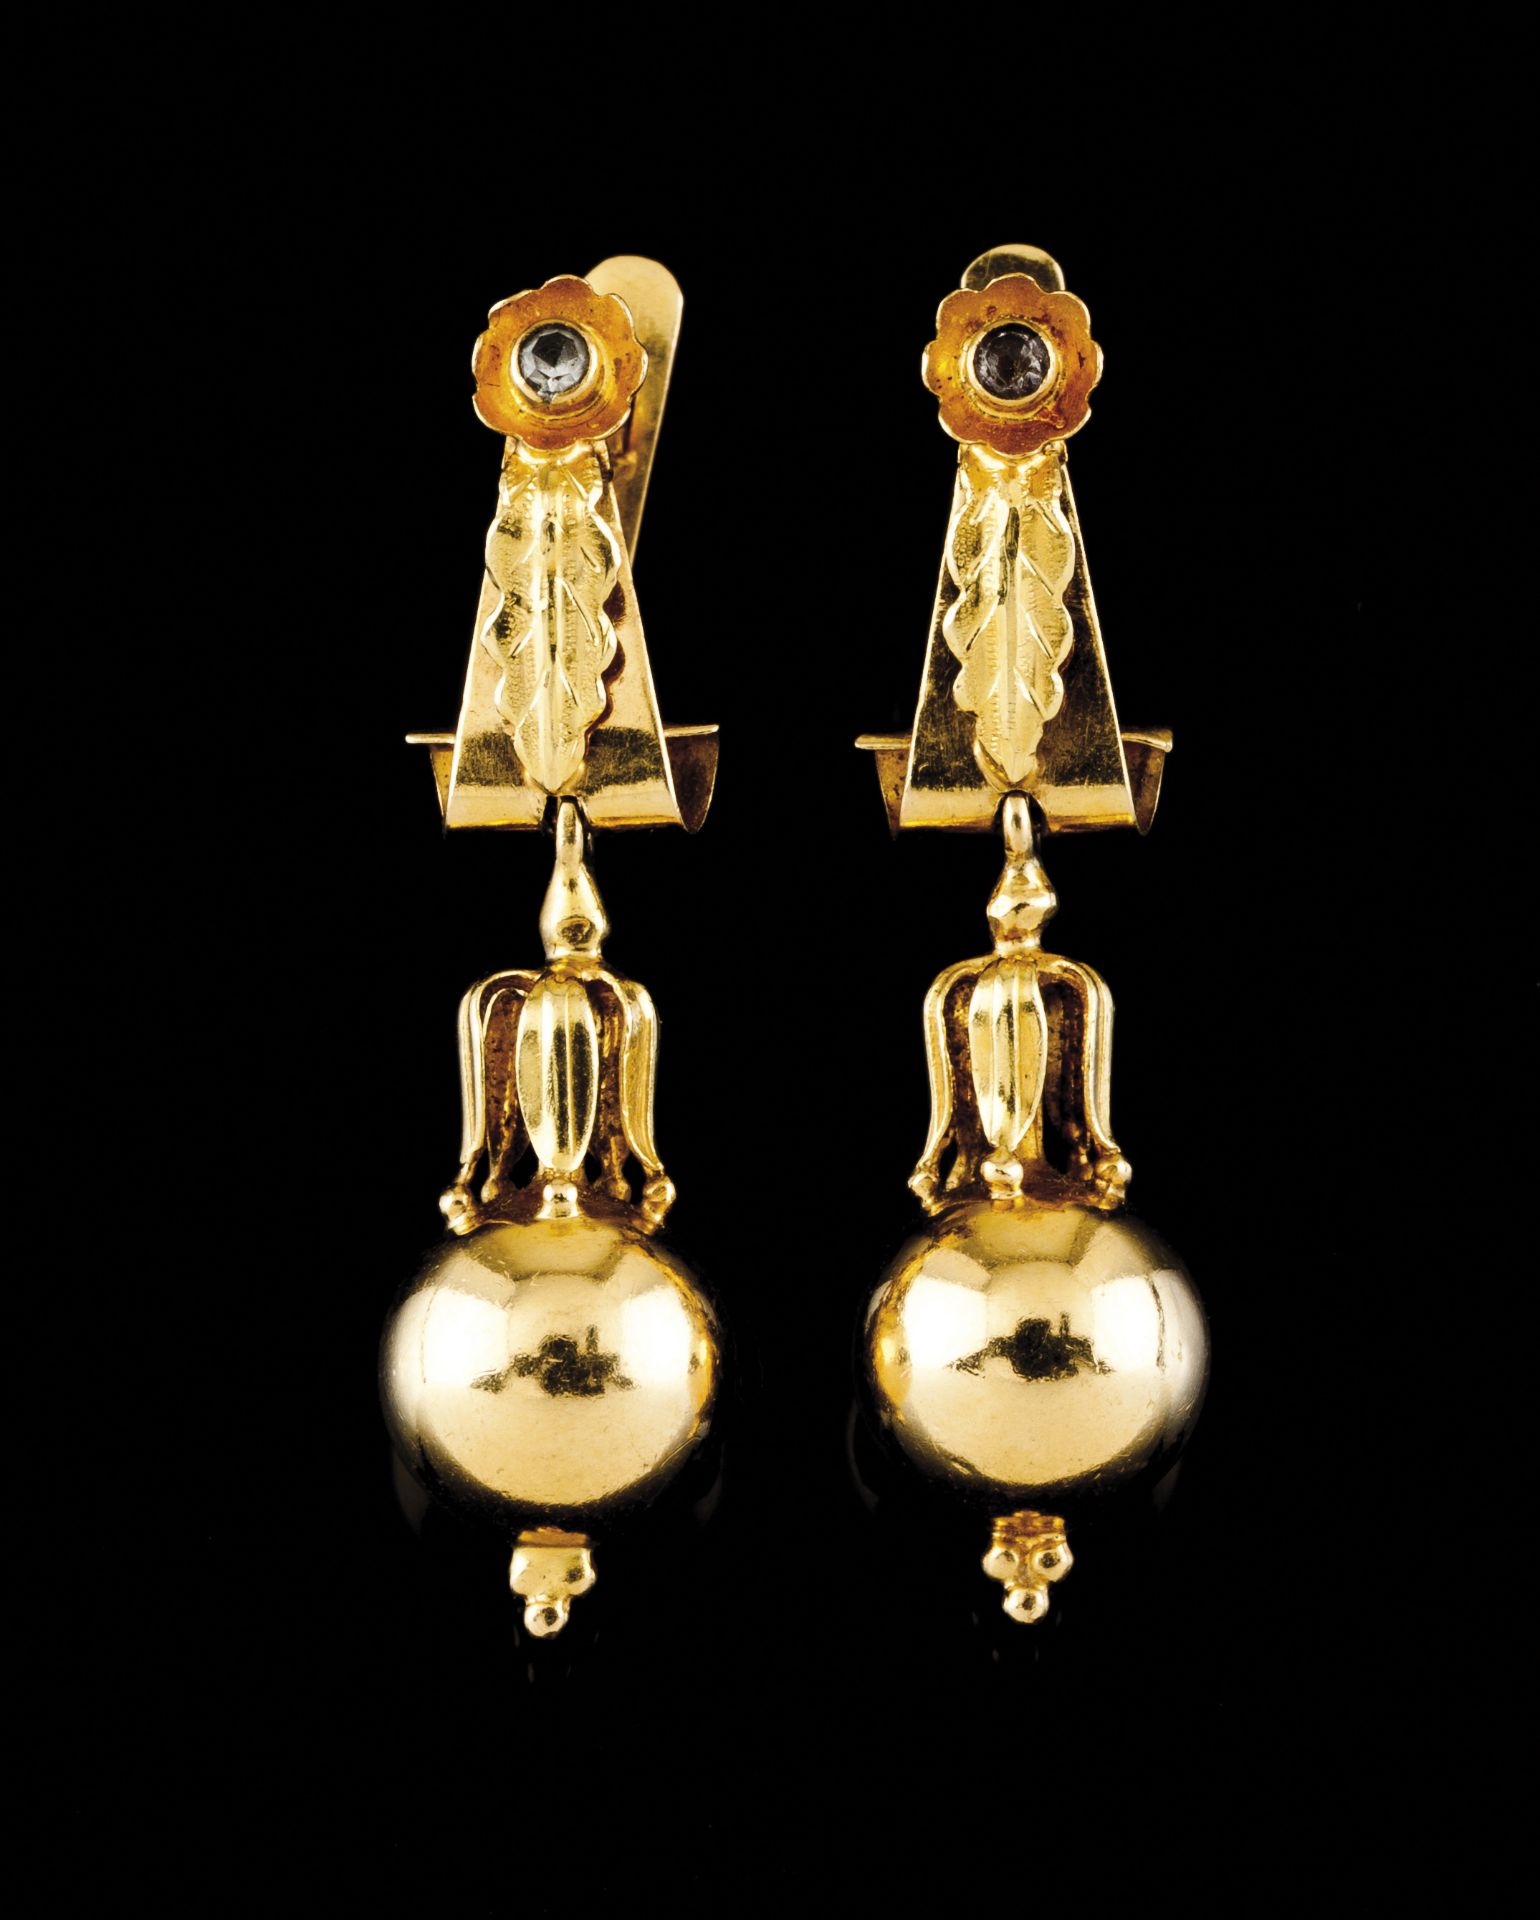 A pair o f earringsPortuguese traditional goldOf chiselled leaf decoration and spherical drop set